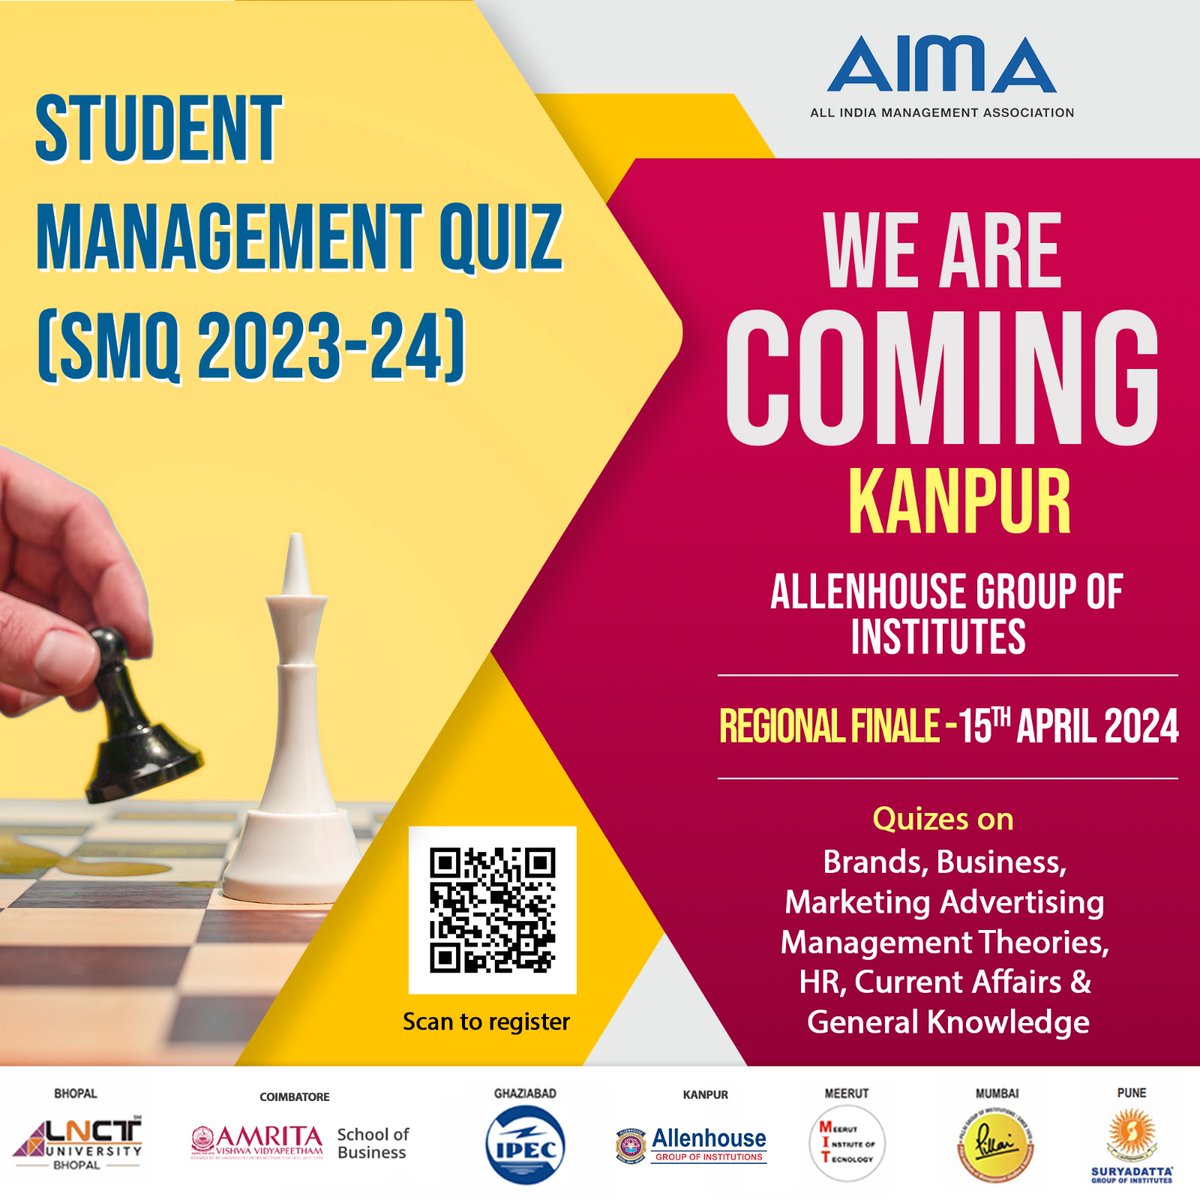 Join us for AIMA’s 27th Student Management Games (SMG) in Kanpur this time! A National Competition for thrill and skills of running a company through Business Simulation, this computer-based event allows participants to manage a business with multiple functional areas and taking